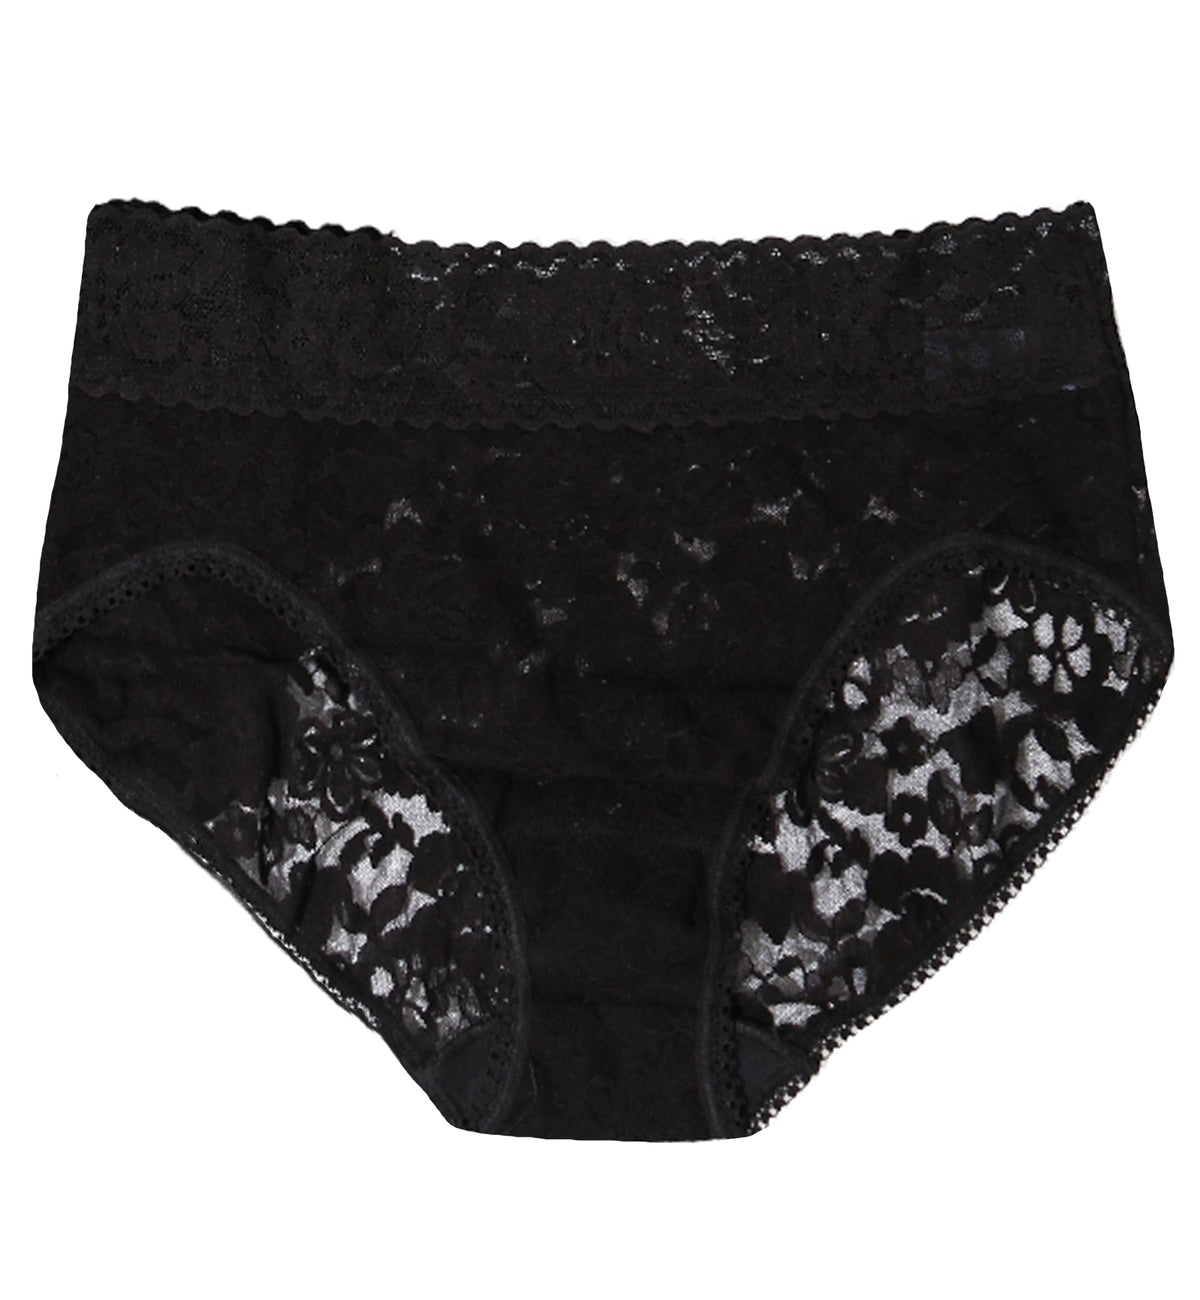 Hanky Panky Signature Lace French Brief (461),Small,Black - Black,Small